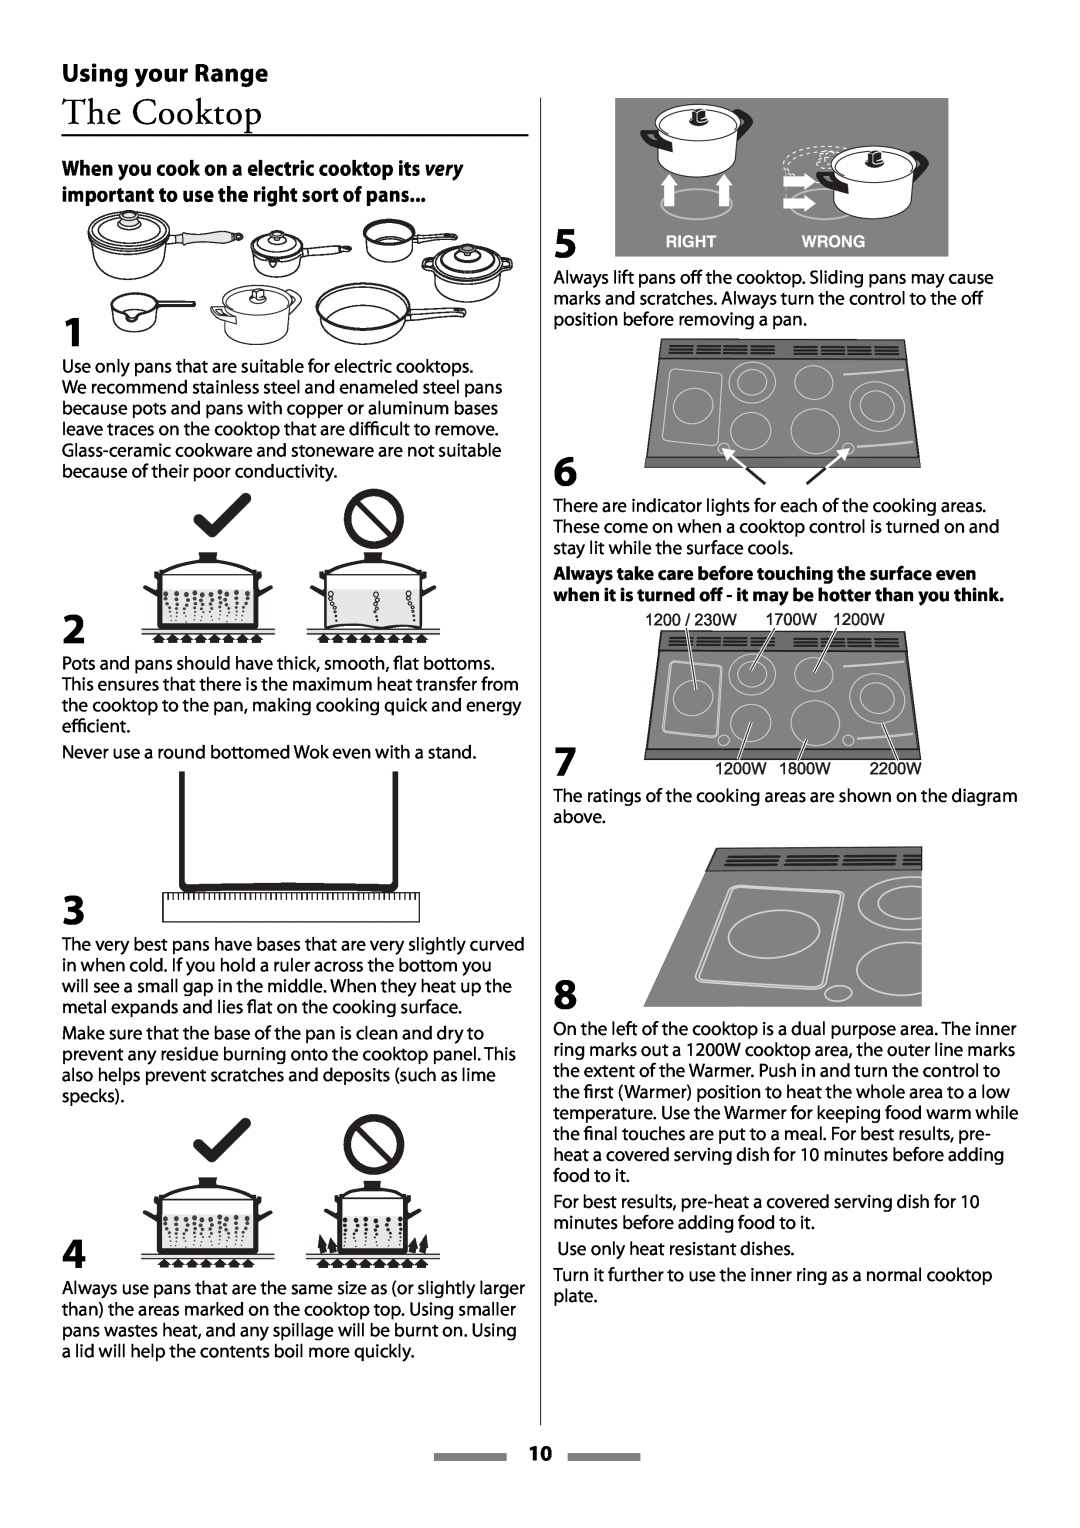 Aga Ranges Legacy 44 installation instructions The Cooktop, Using your Range, When you cook on a electric cooktop its very 